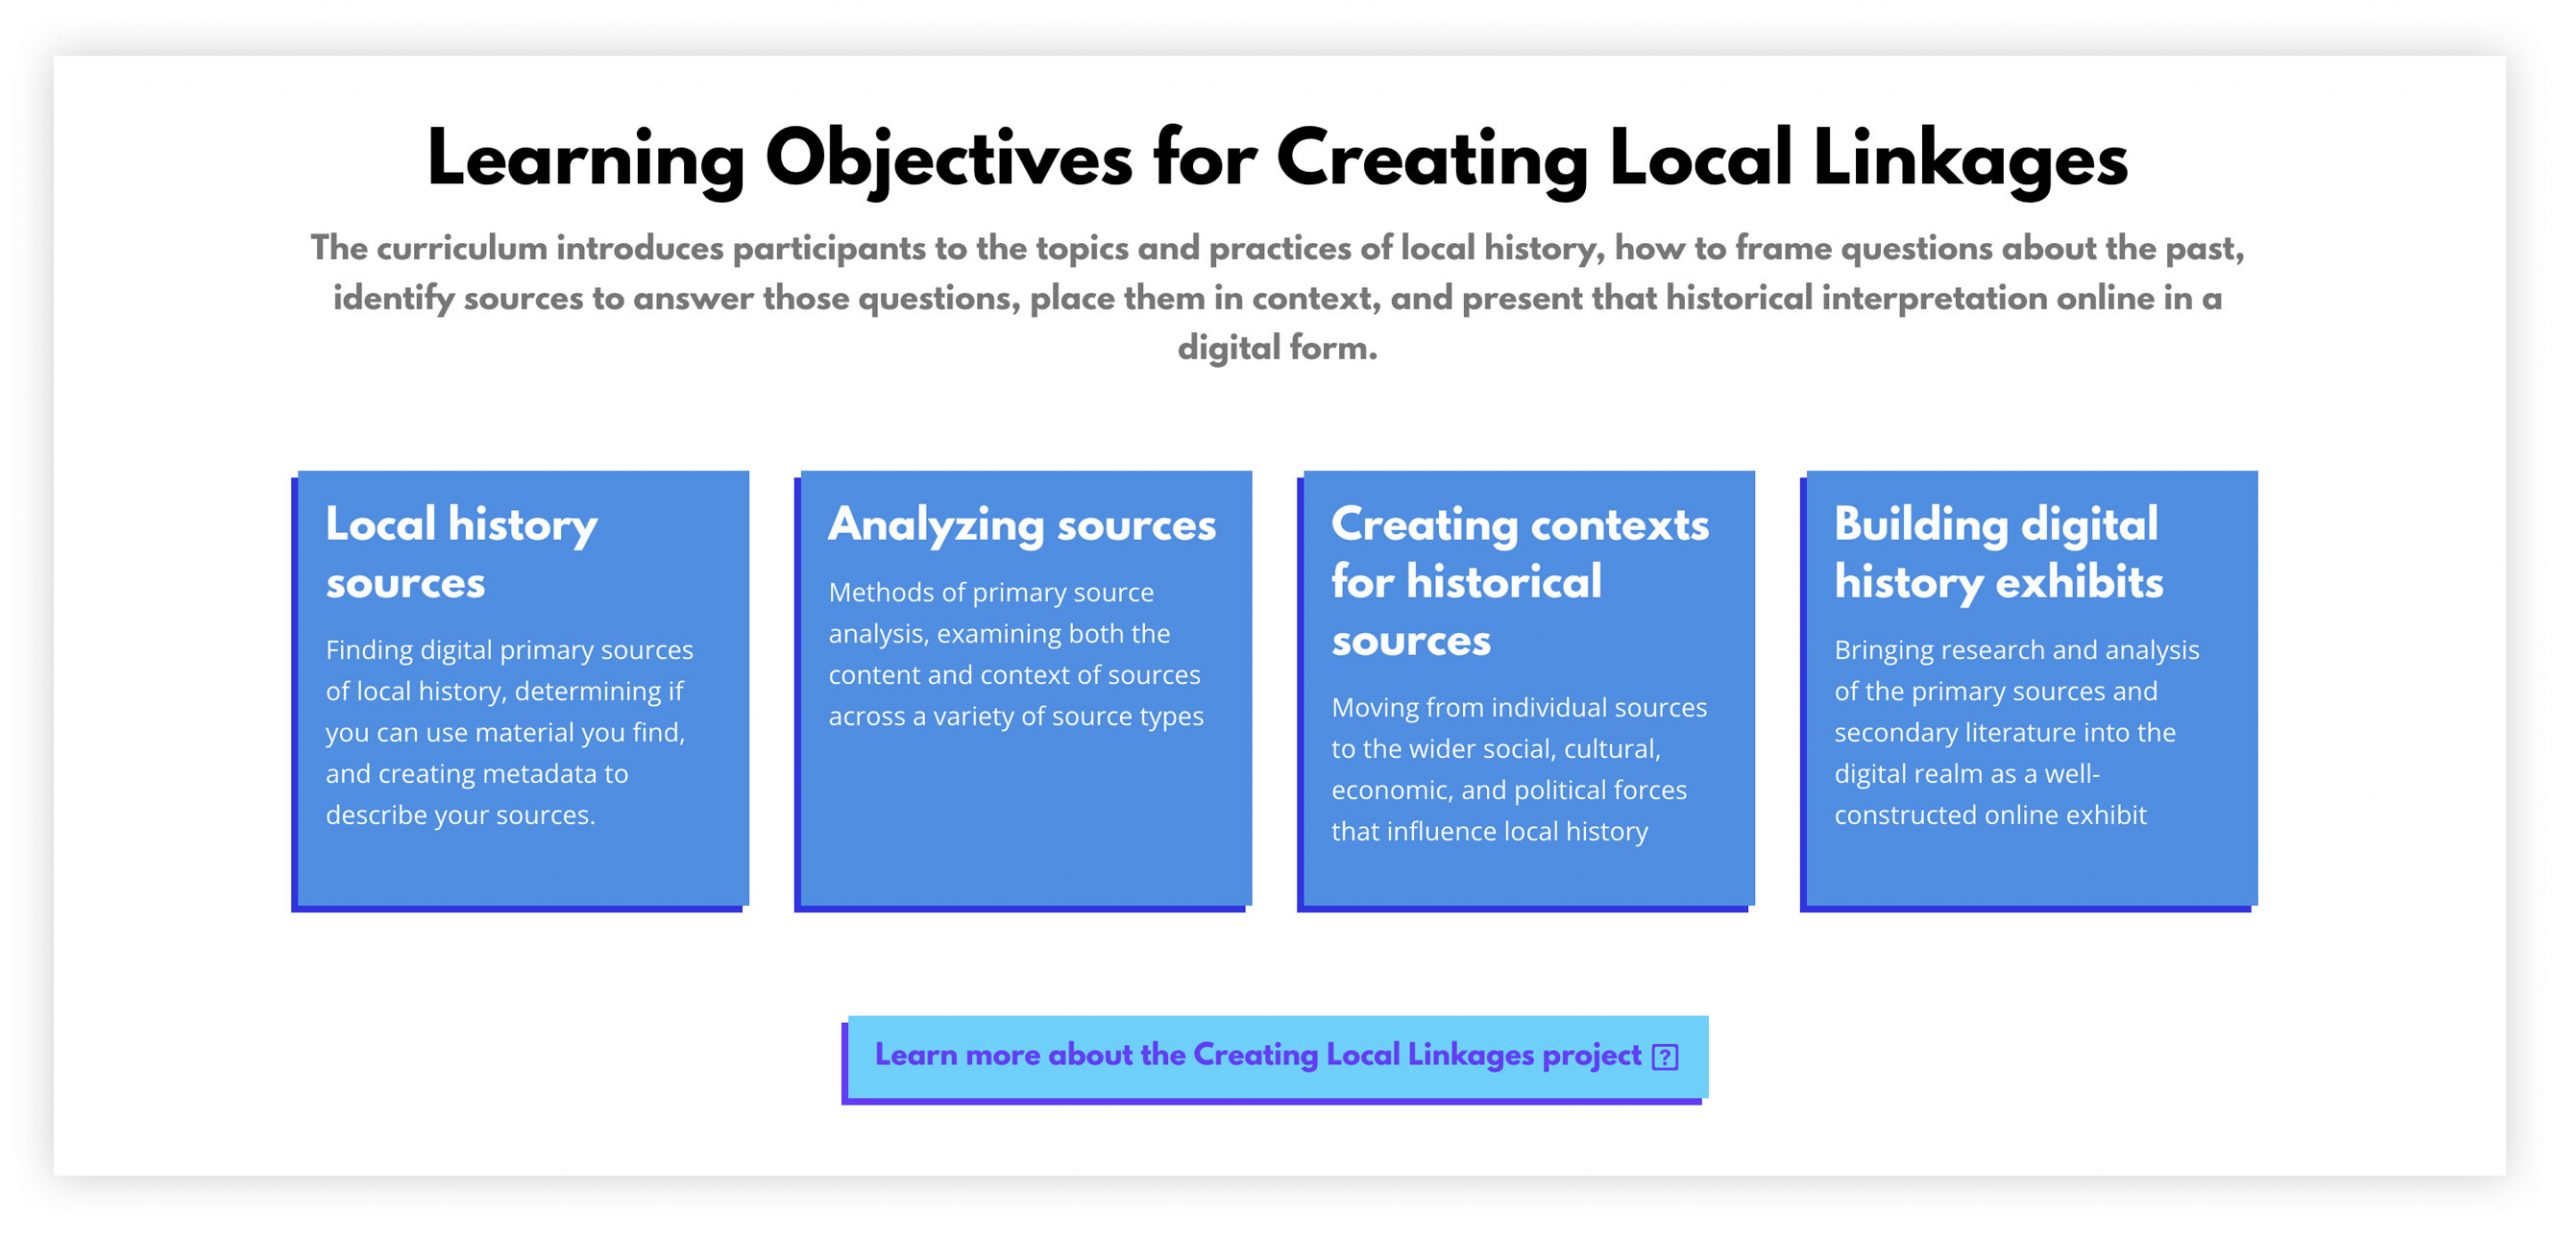 Screengrab of the Creating Local Linkages learning objectives.